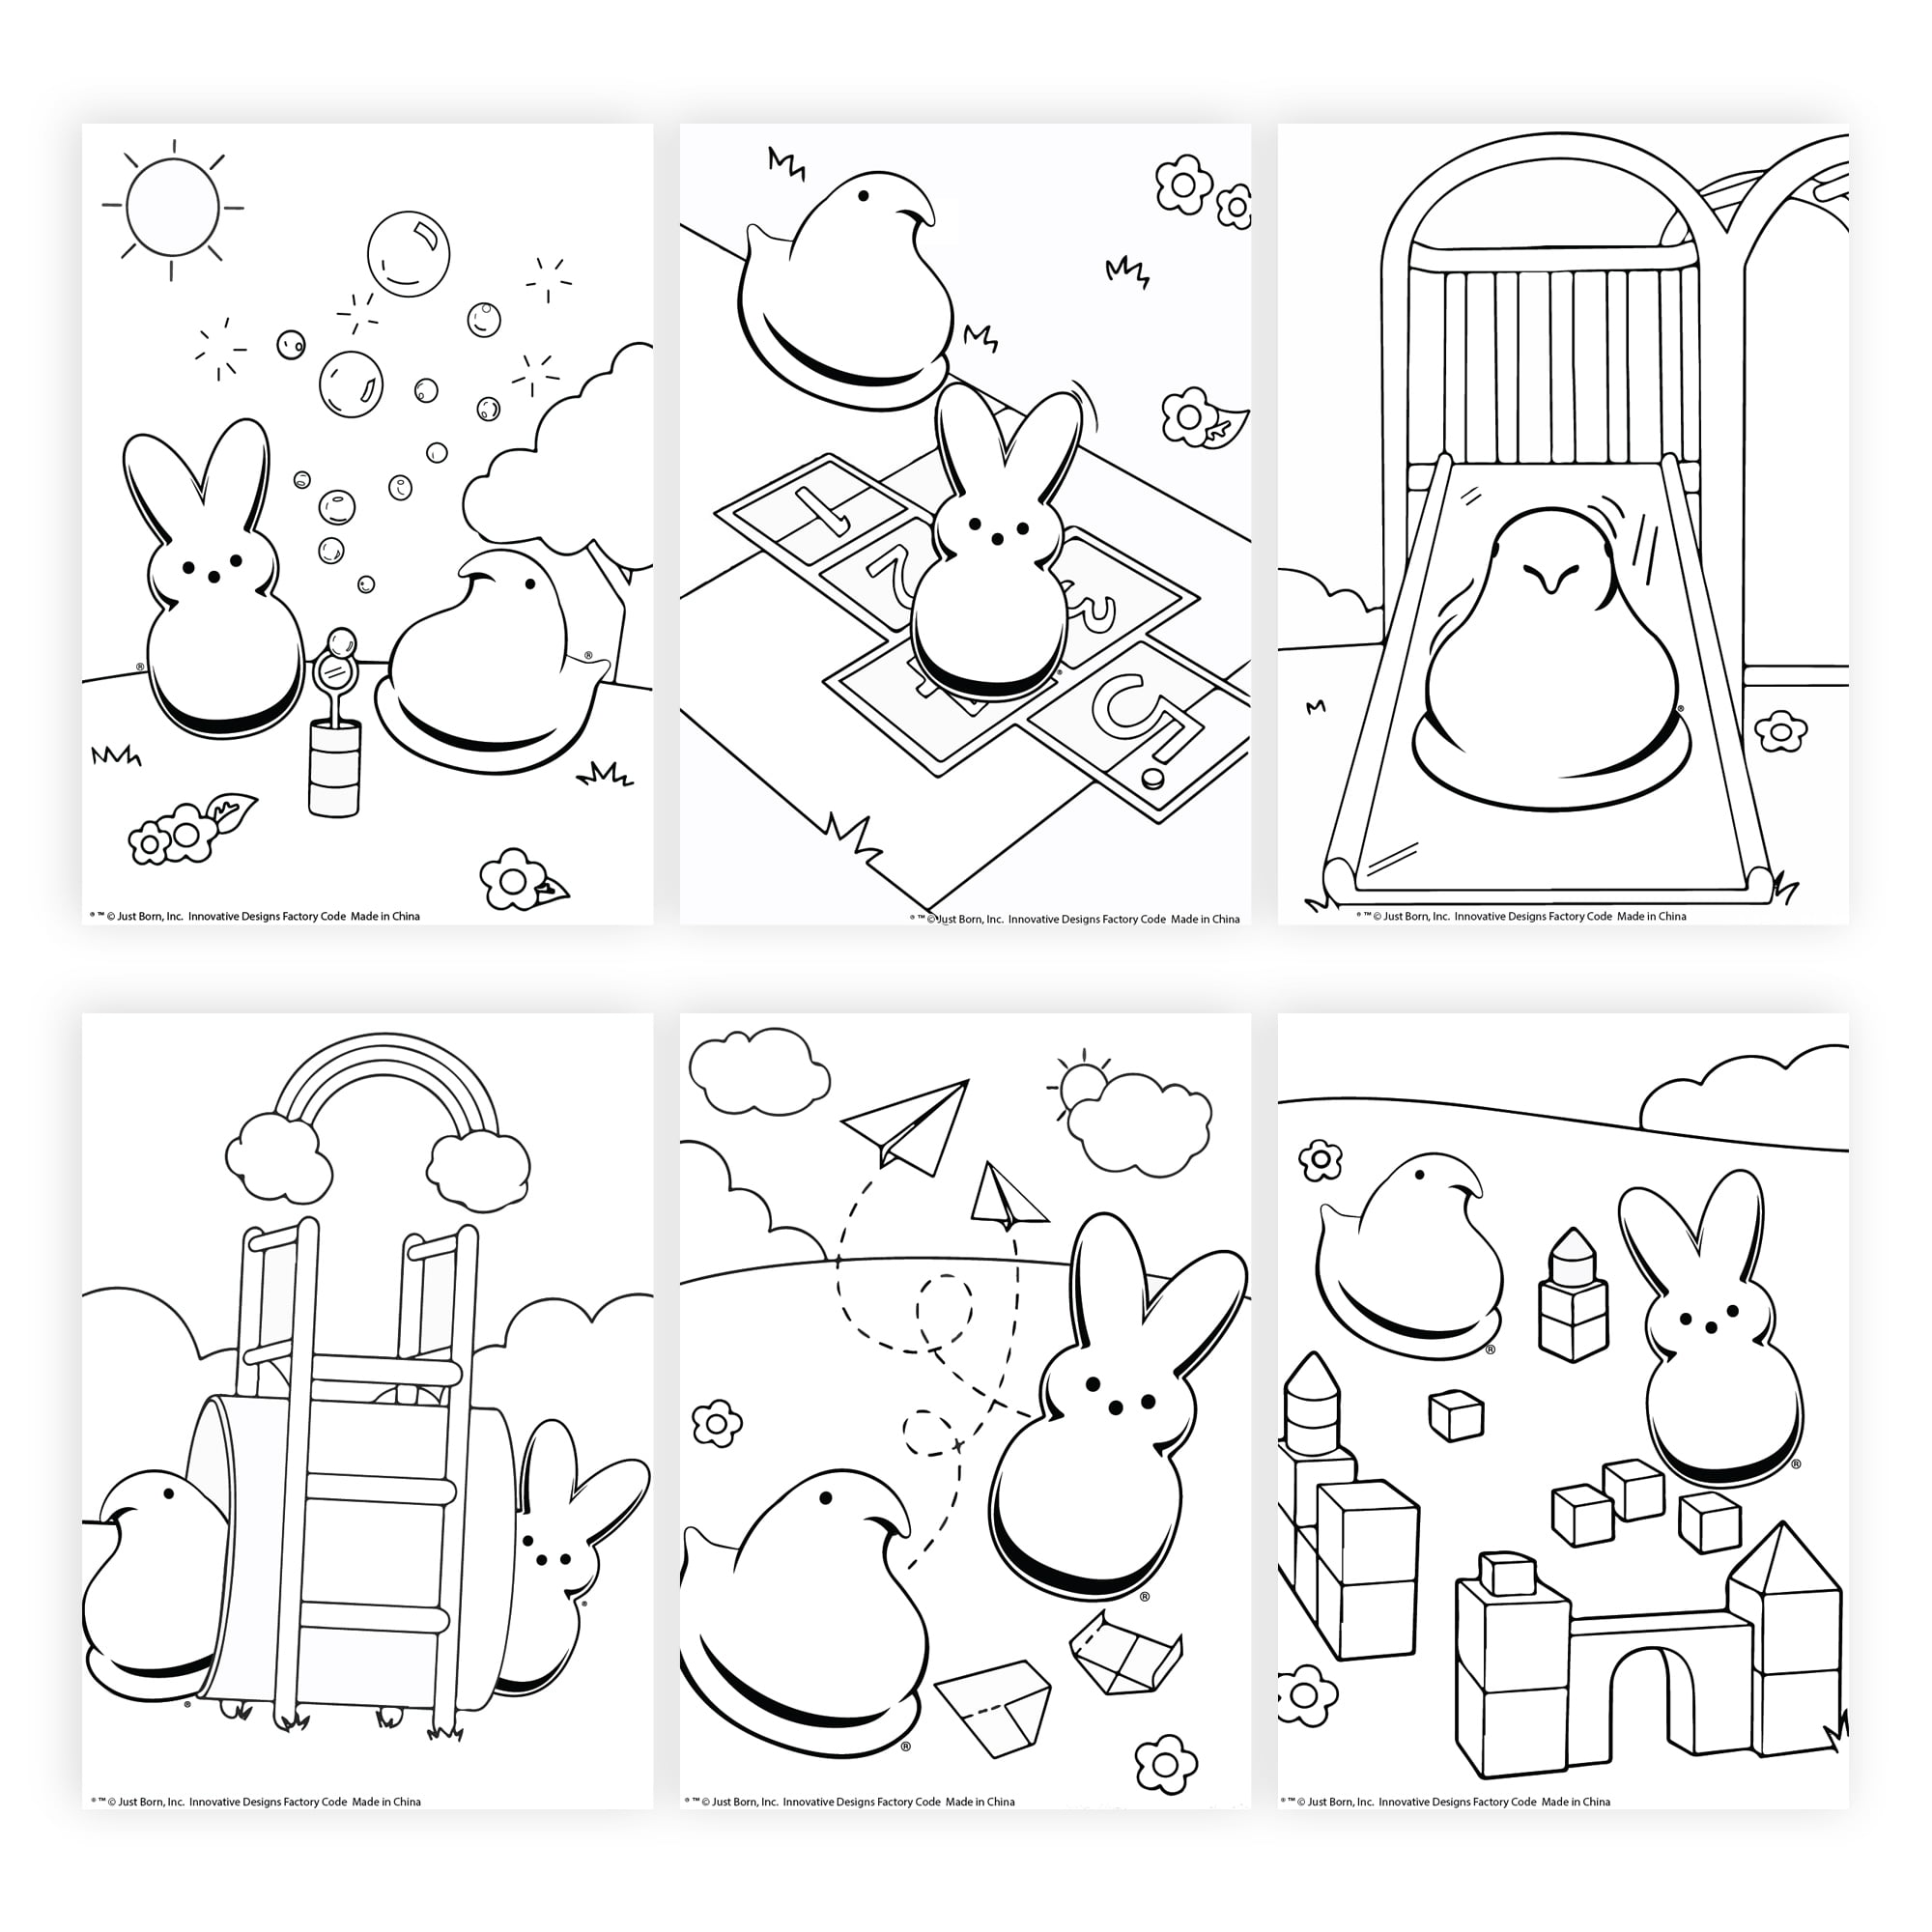 Peeps easter egg activity set includes coloring pages stickers markers crayons